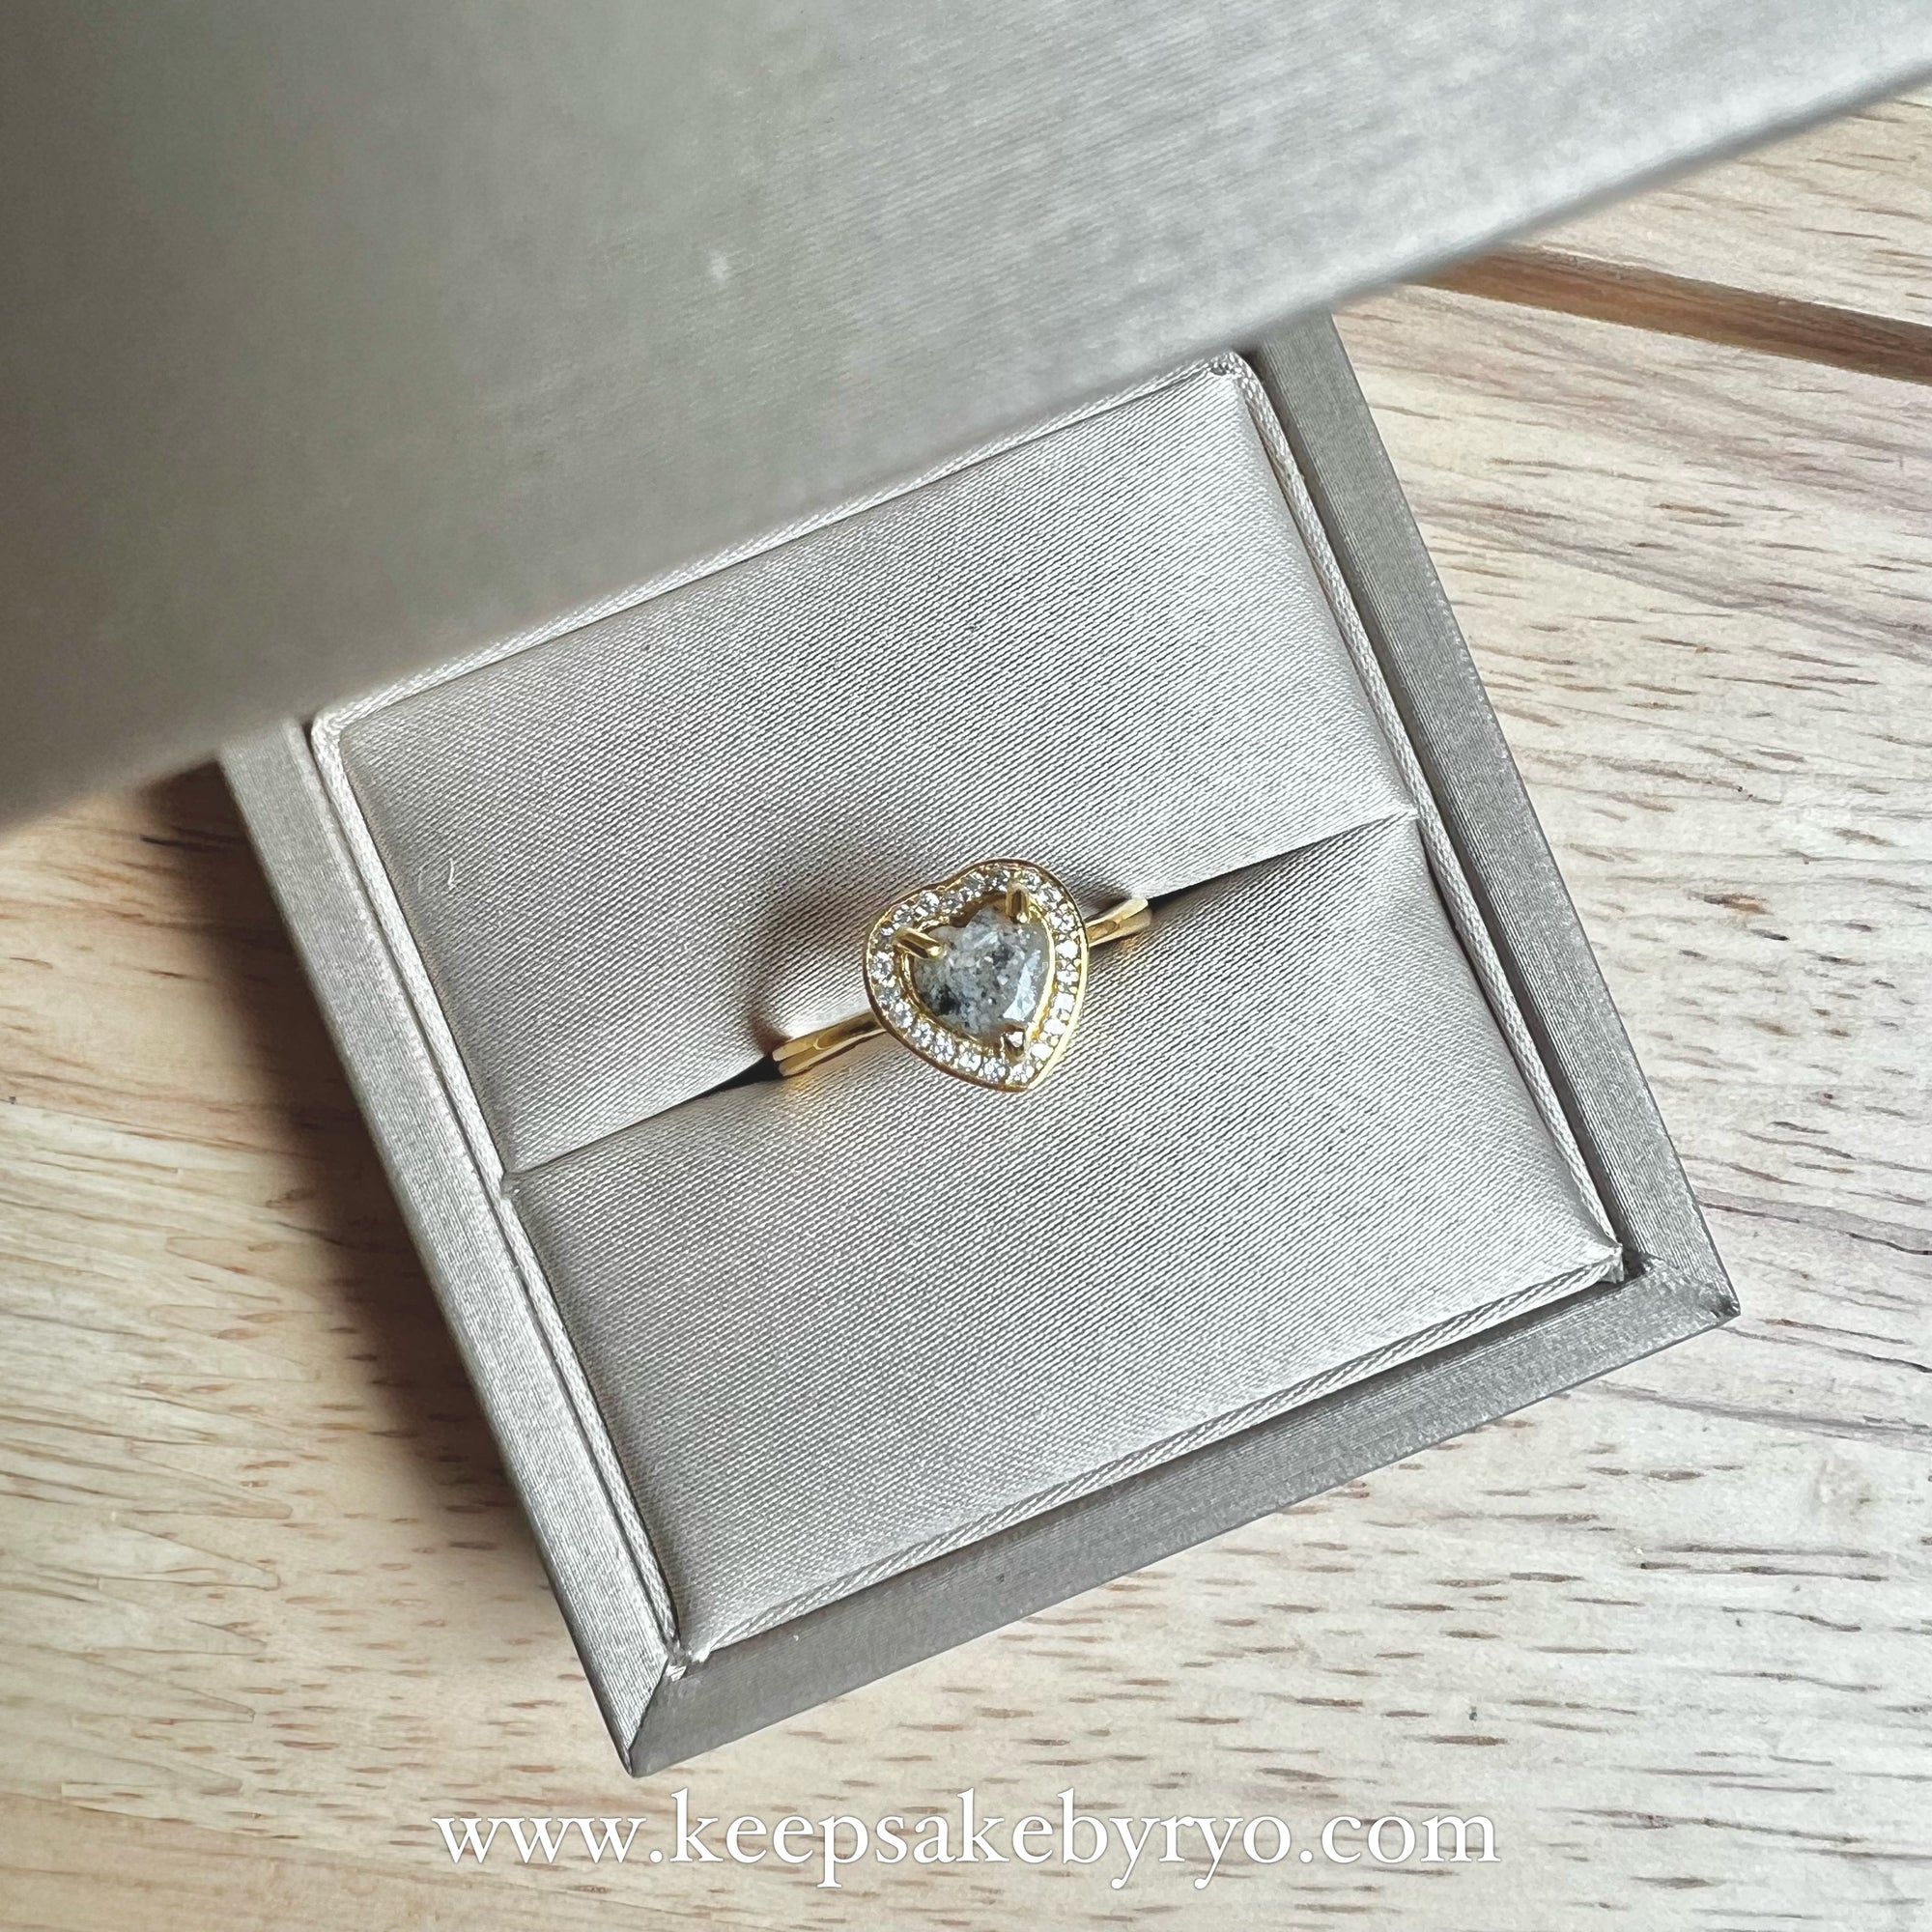 ASHES 925 SOLITAIRE: GEMMA RING WITH HEART INCLUSION STONE